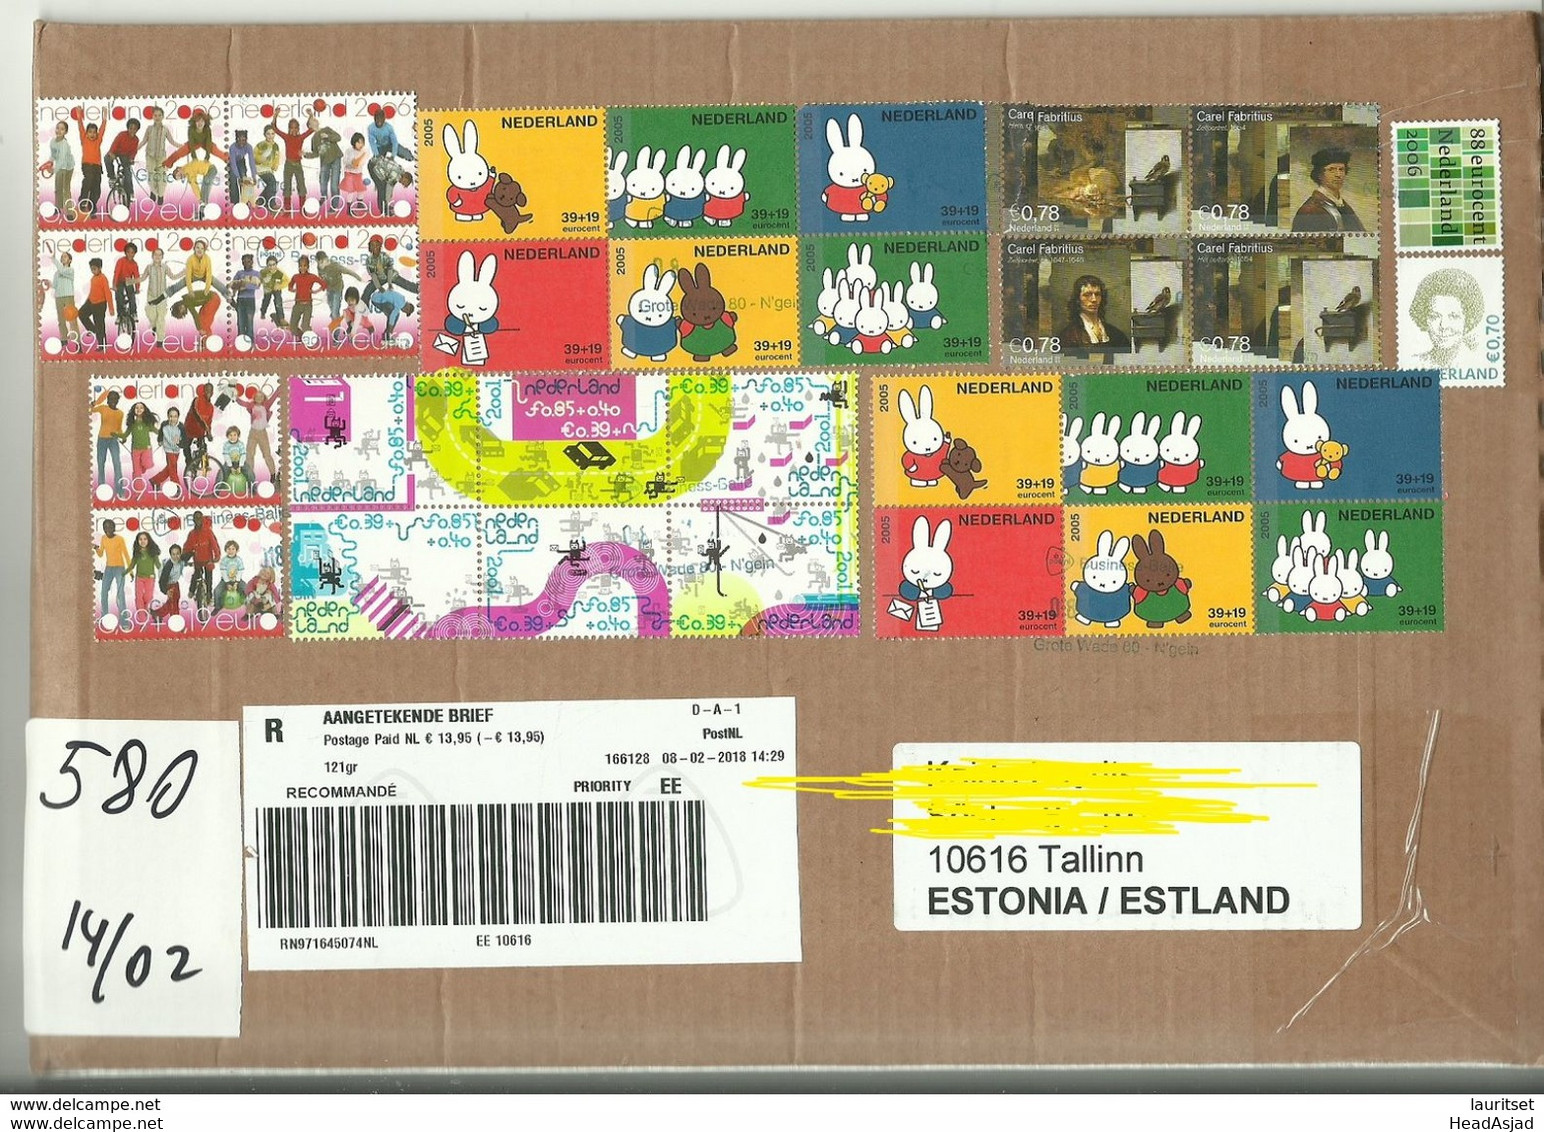 NEDERLAND NETHERLANDS 2018 Registered Cover To Estonia With 30 Stamps - Covers & Documents